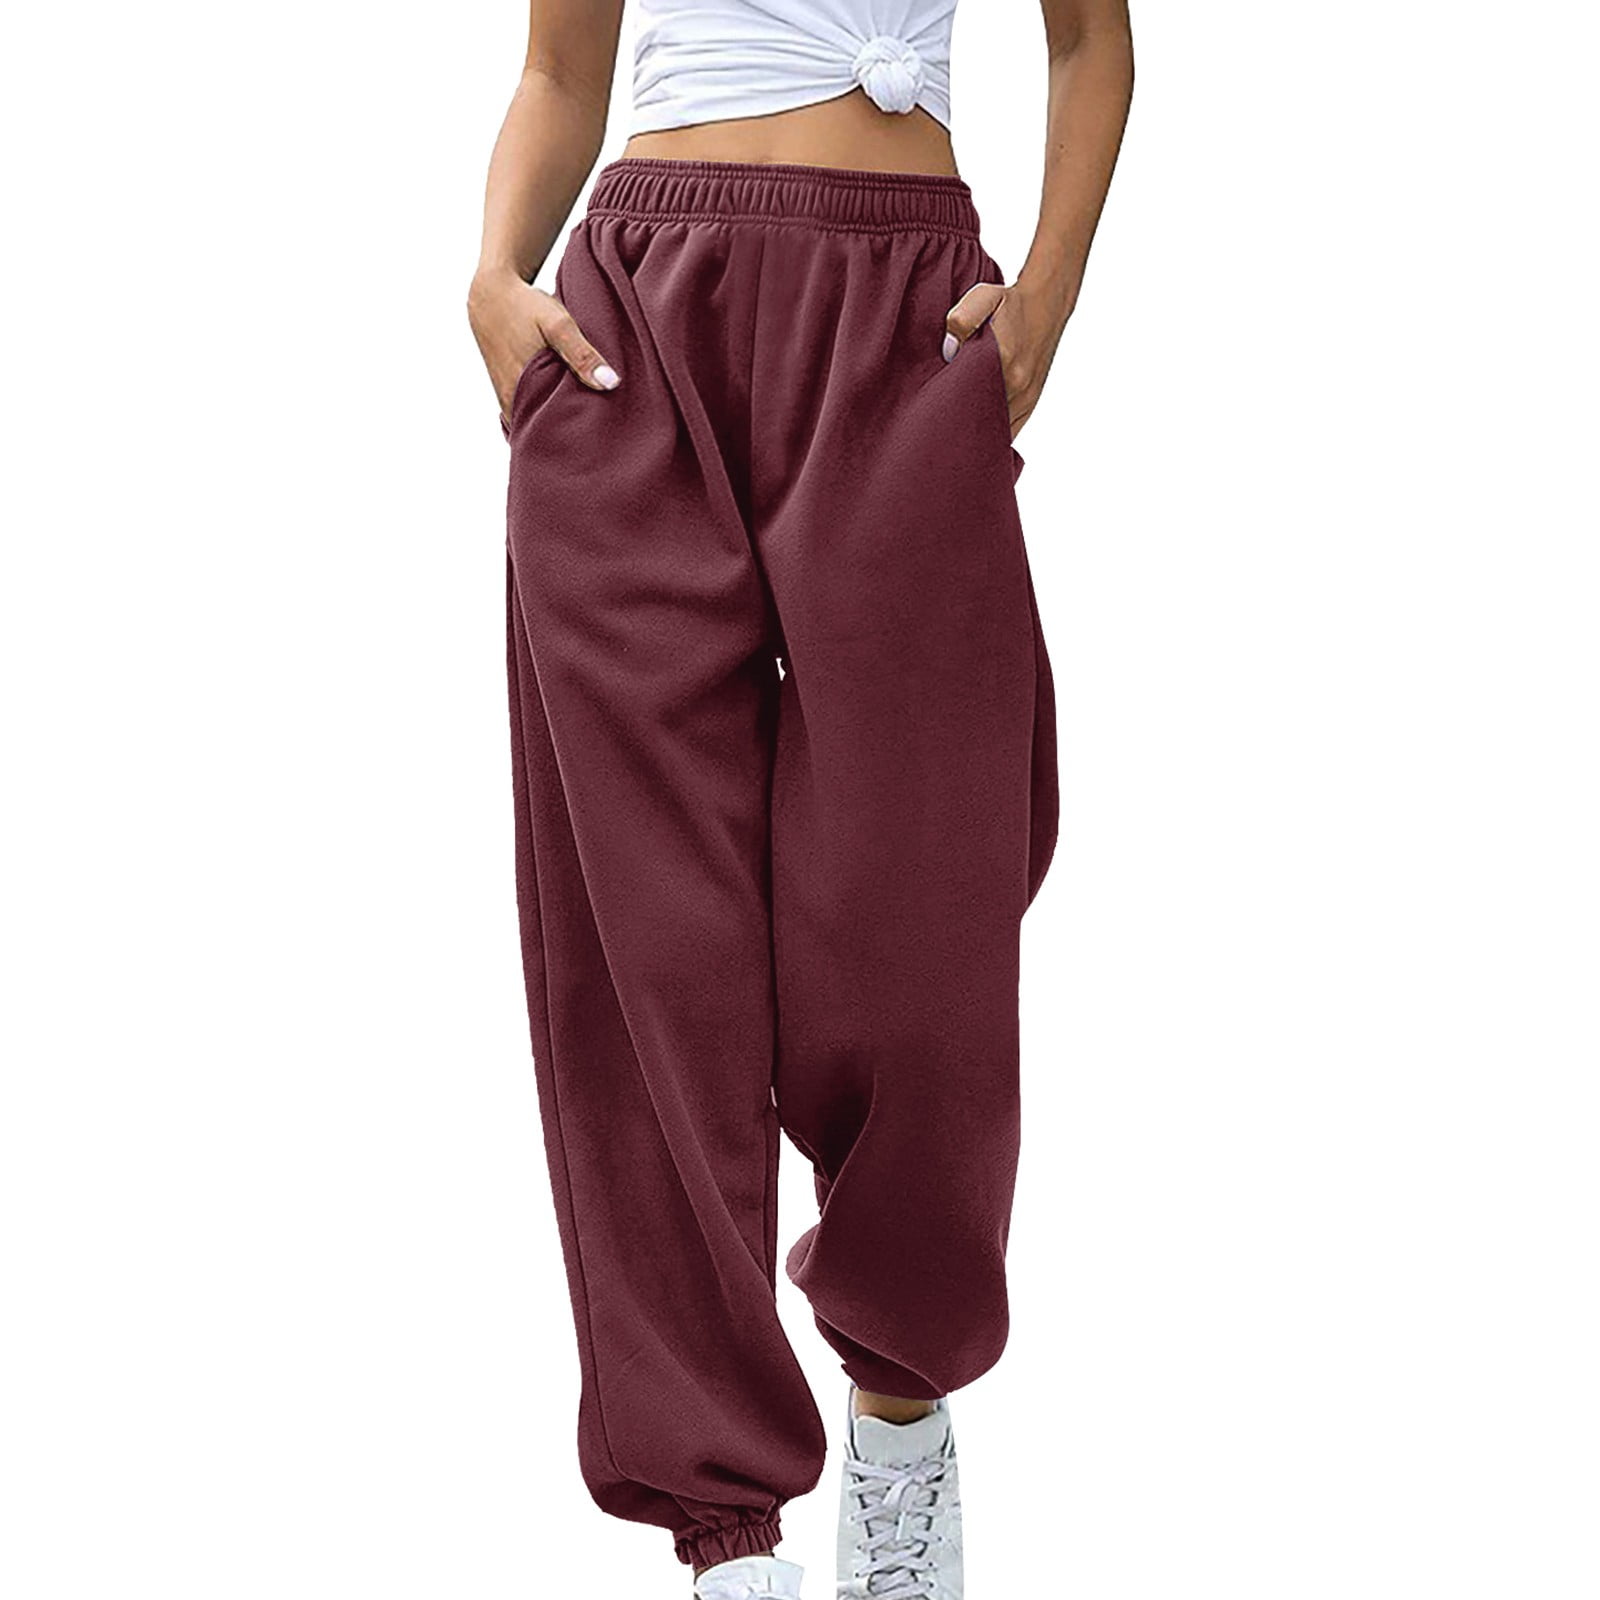  Pelixio Womens High Waisted Sweatpants Cinch Bottom Pants  Drawstring Casual Baggy Y2K Trendy Athletic Joggers with Pockets Apricot :  Clothing, Shoes & Jewelry